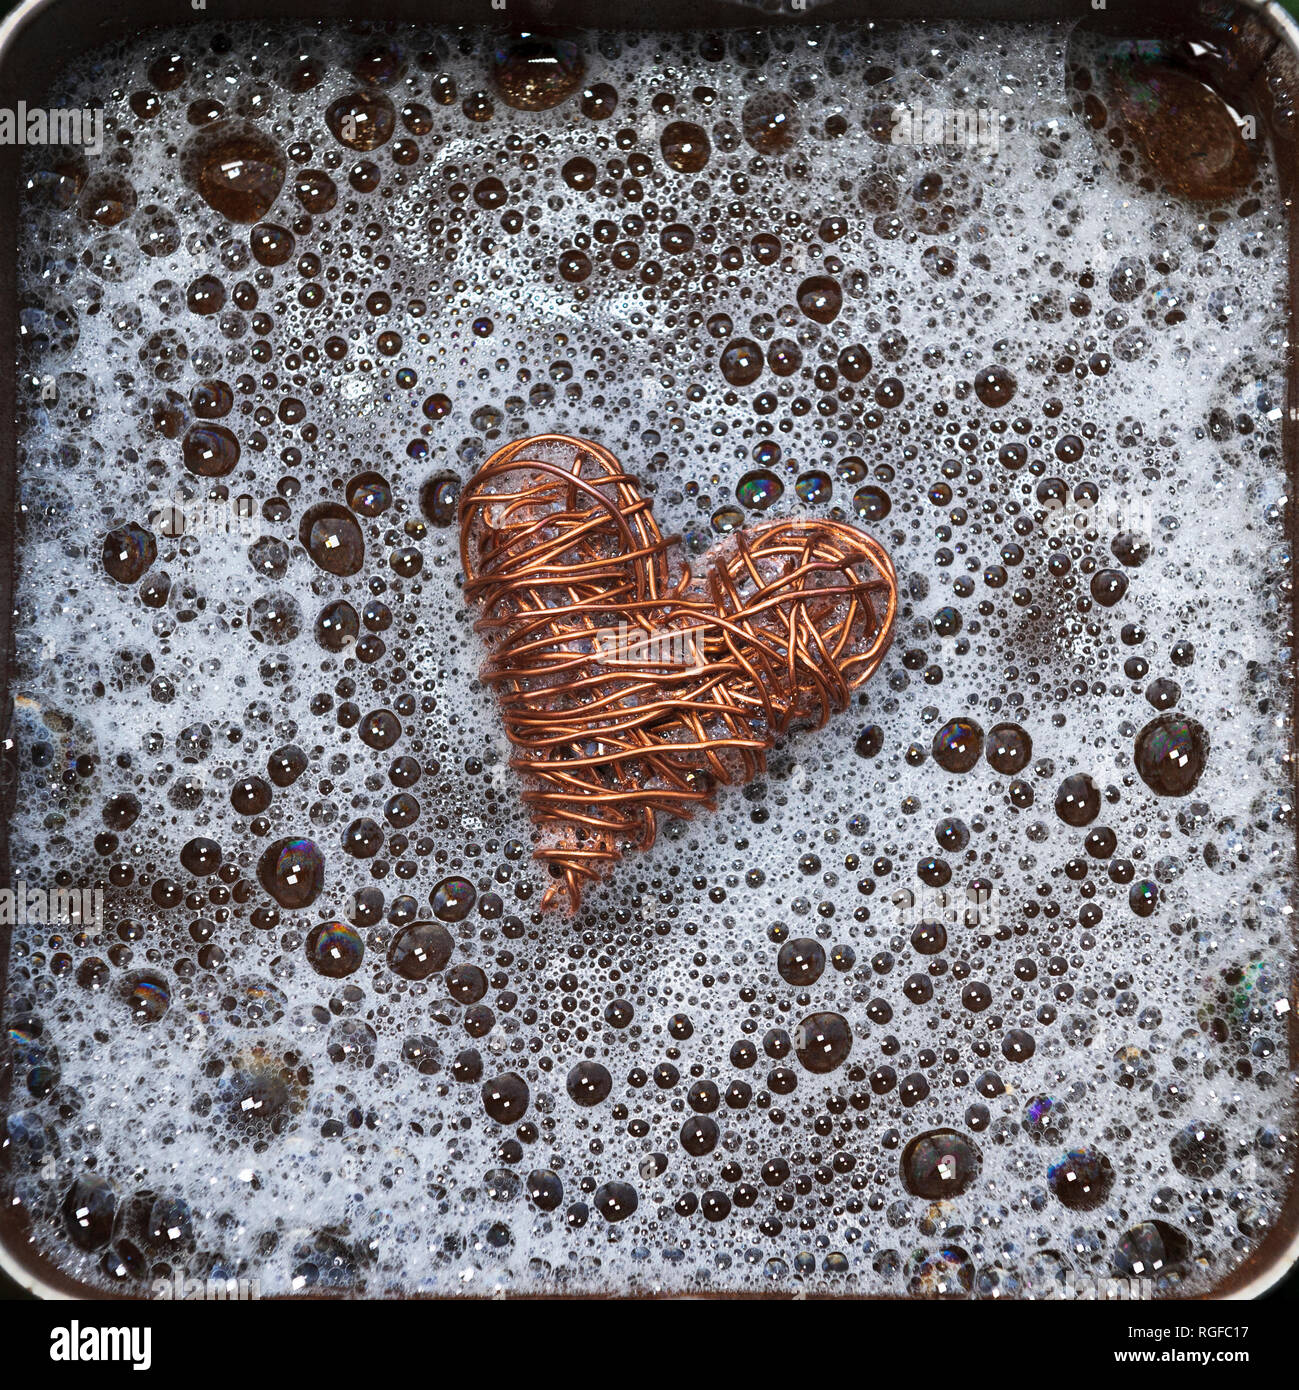 Heart made from copper wire surrounded by bubbly water. Stock Photo